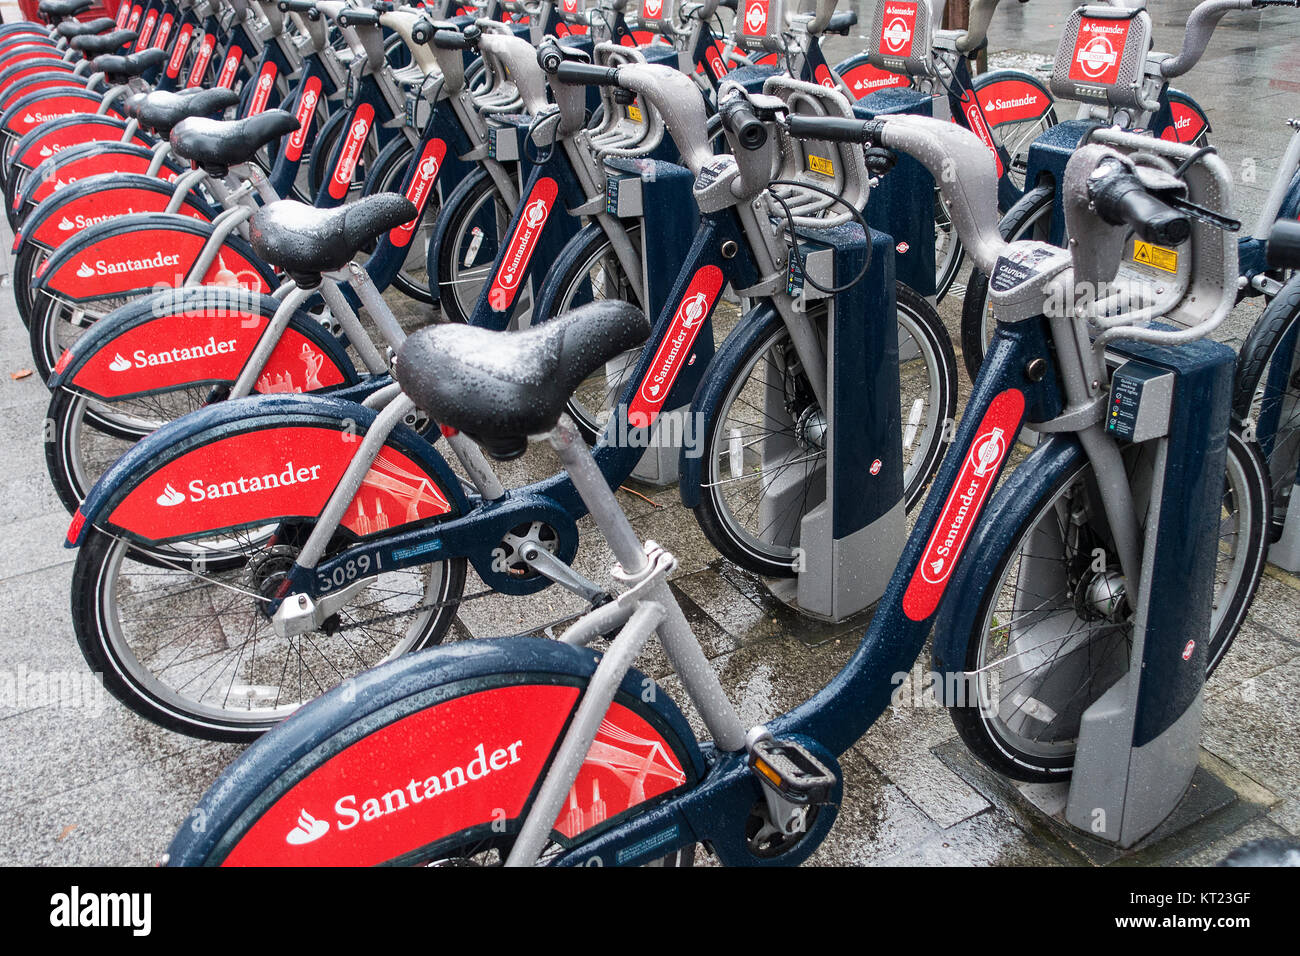 Lines of Red Rental Bicycles with Snow on Saddles Sponsored by Santander near Tower Bridge London England United Kingdom UK Stock Photo